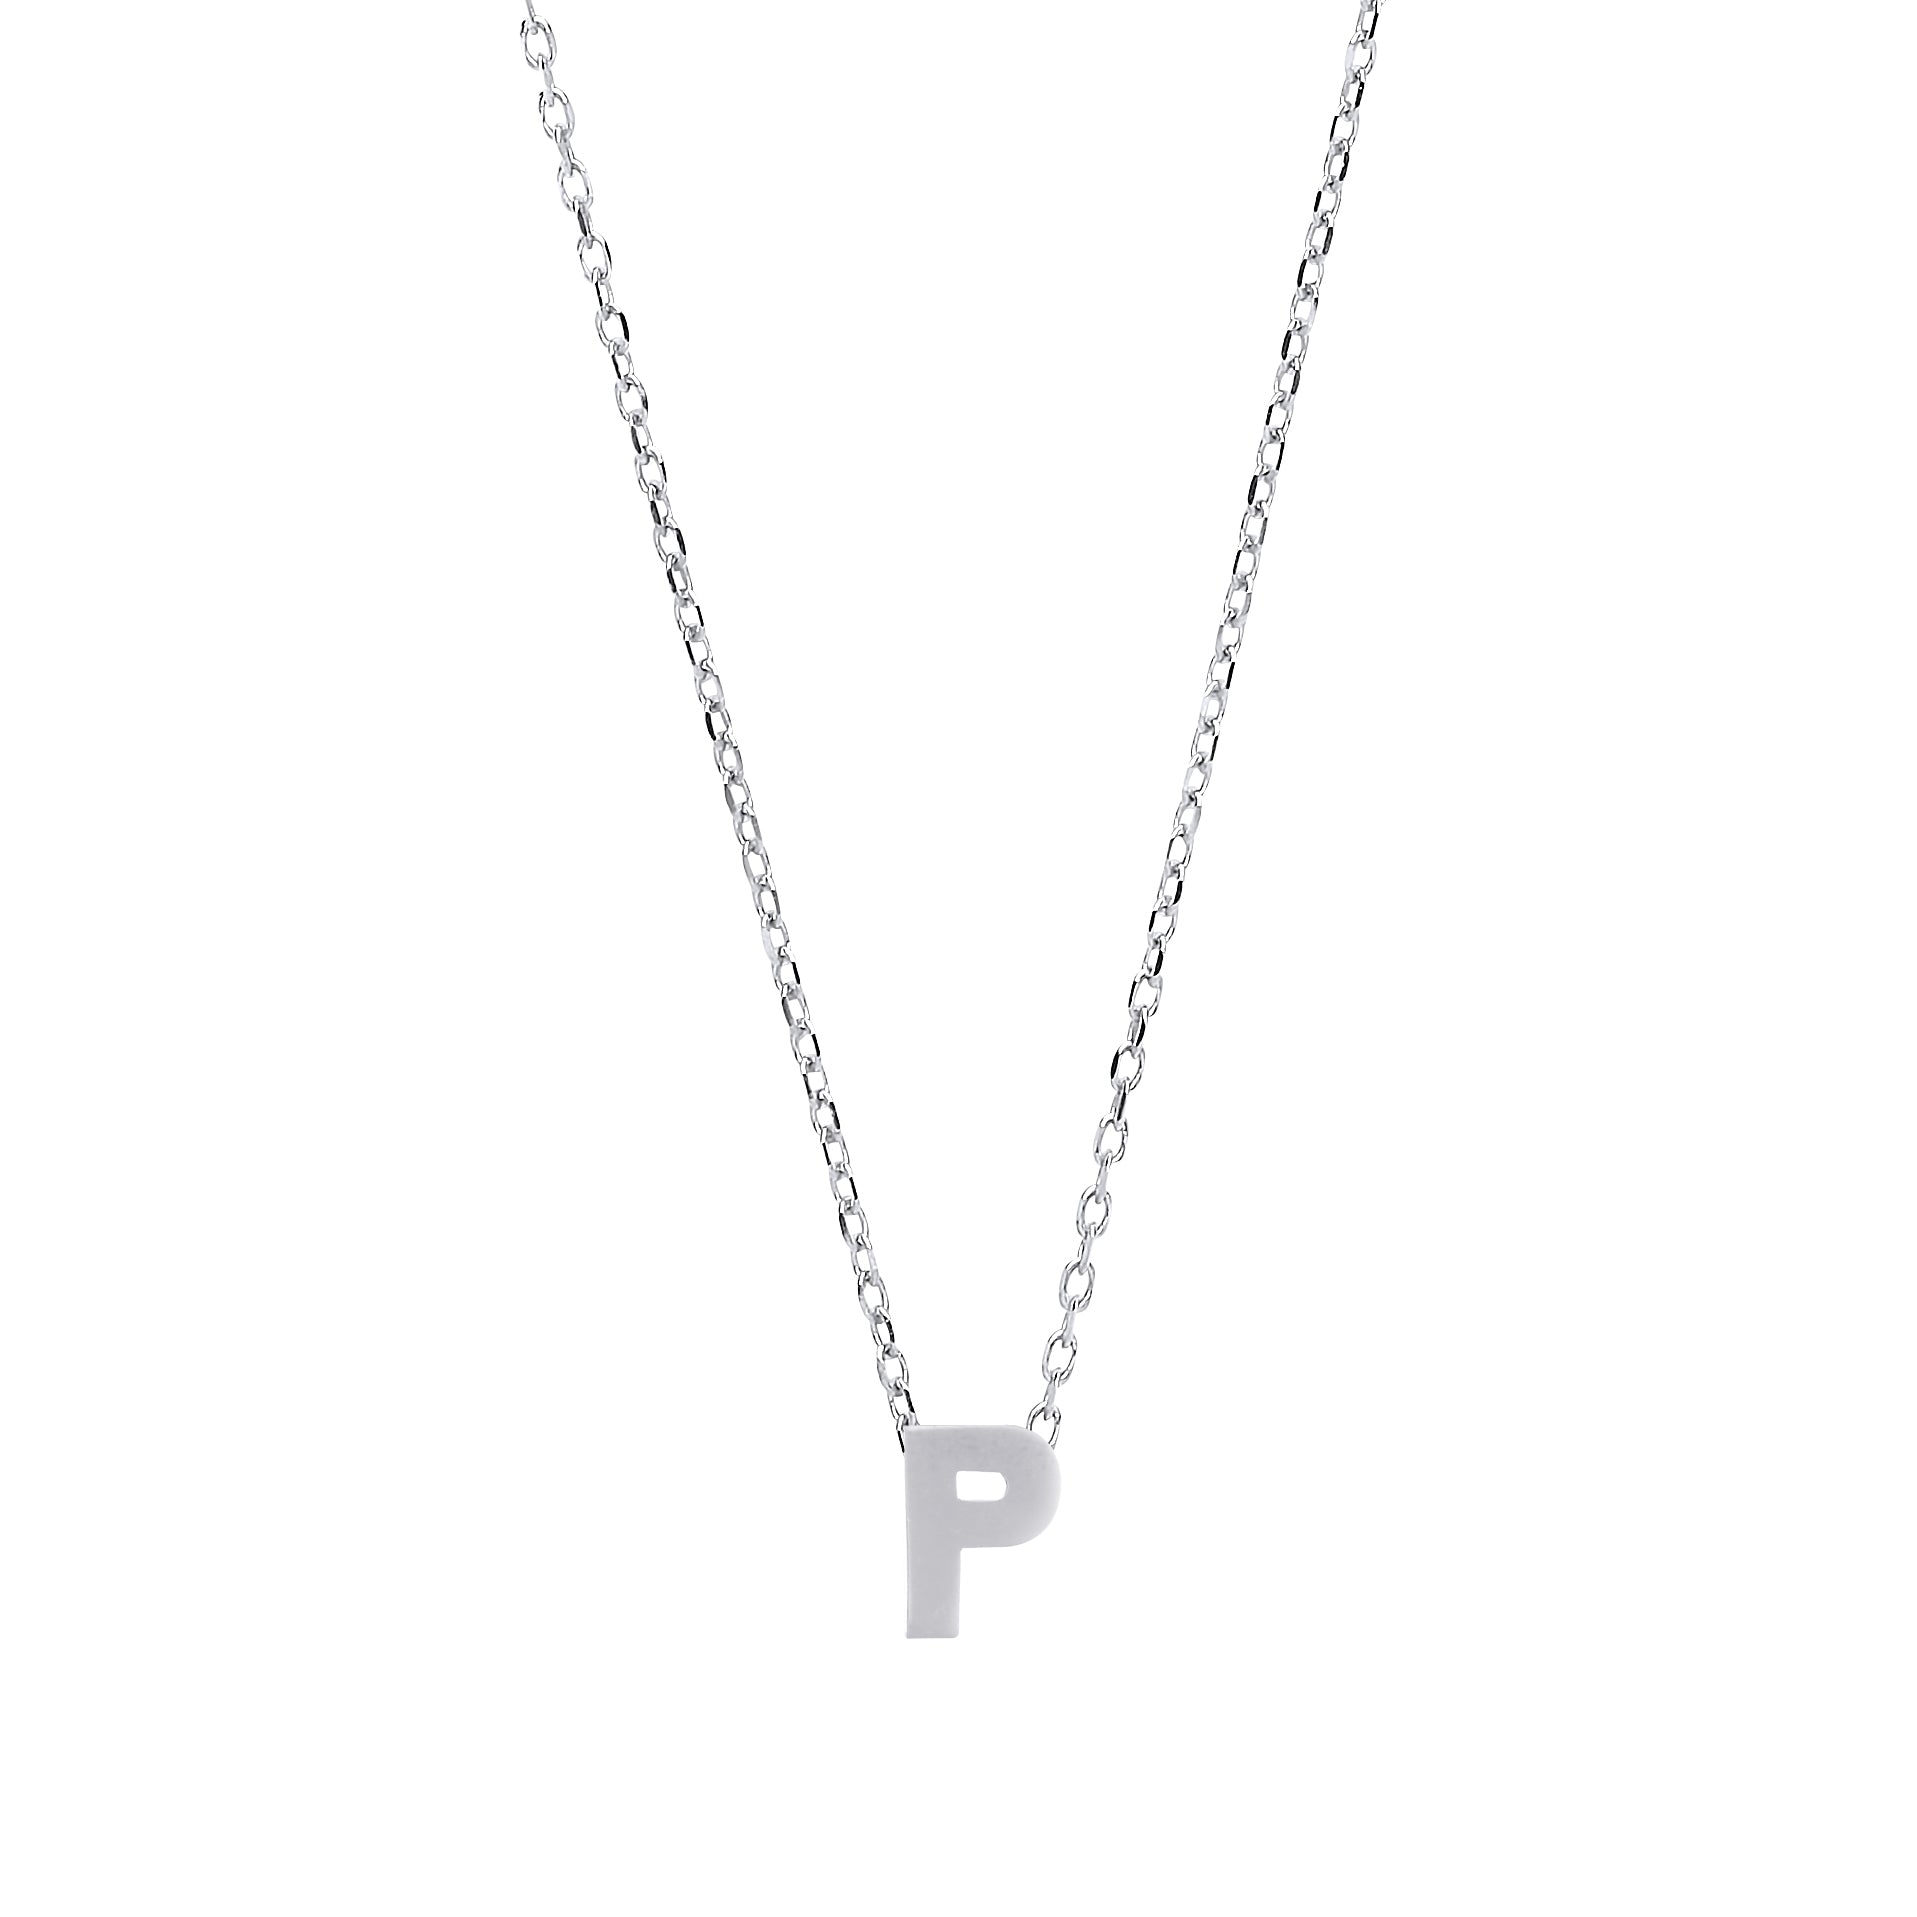 Silver  Letter P Initial Pendant Necklace 18 inch - GIN4P